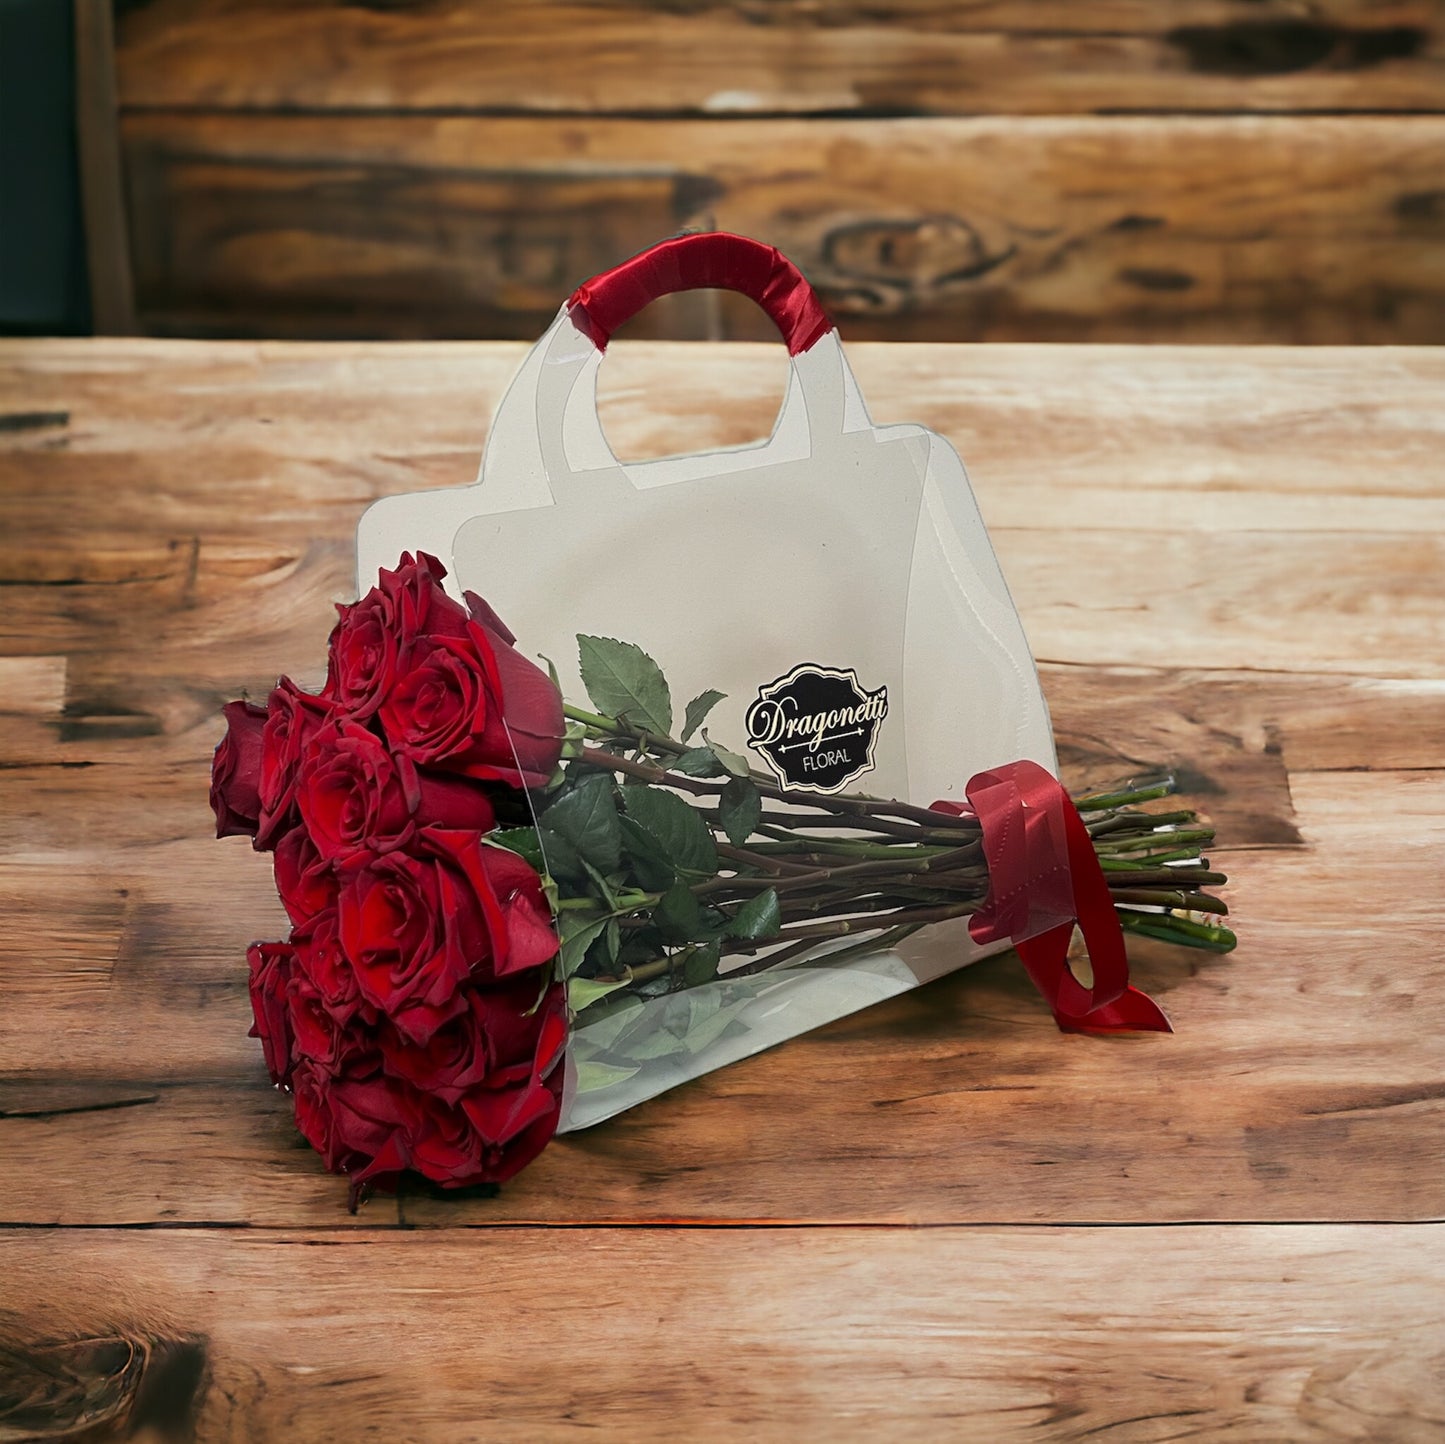 Red roses purse flowers bouquet